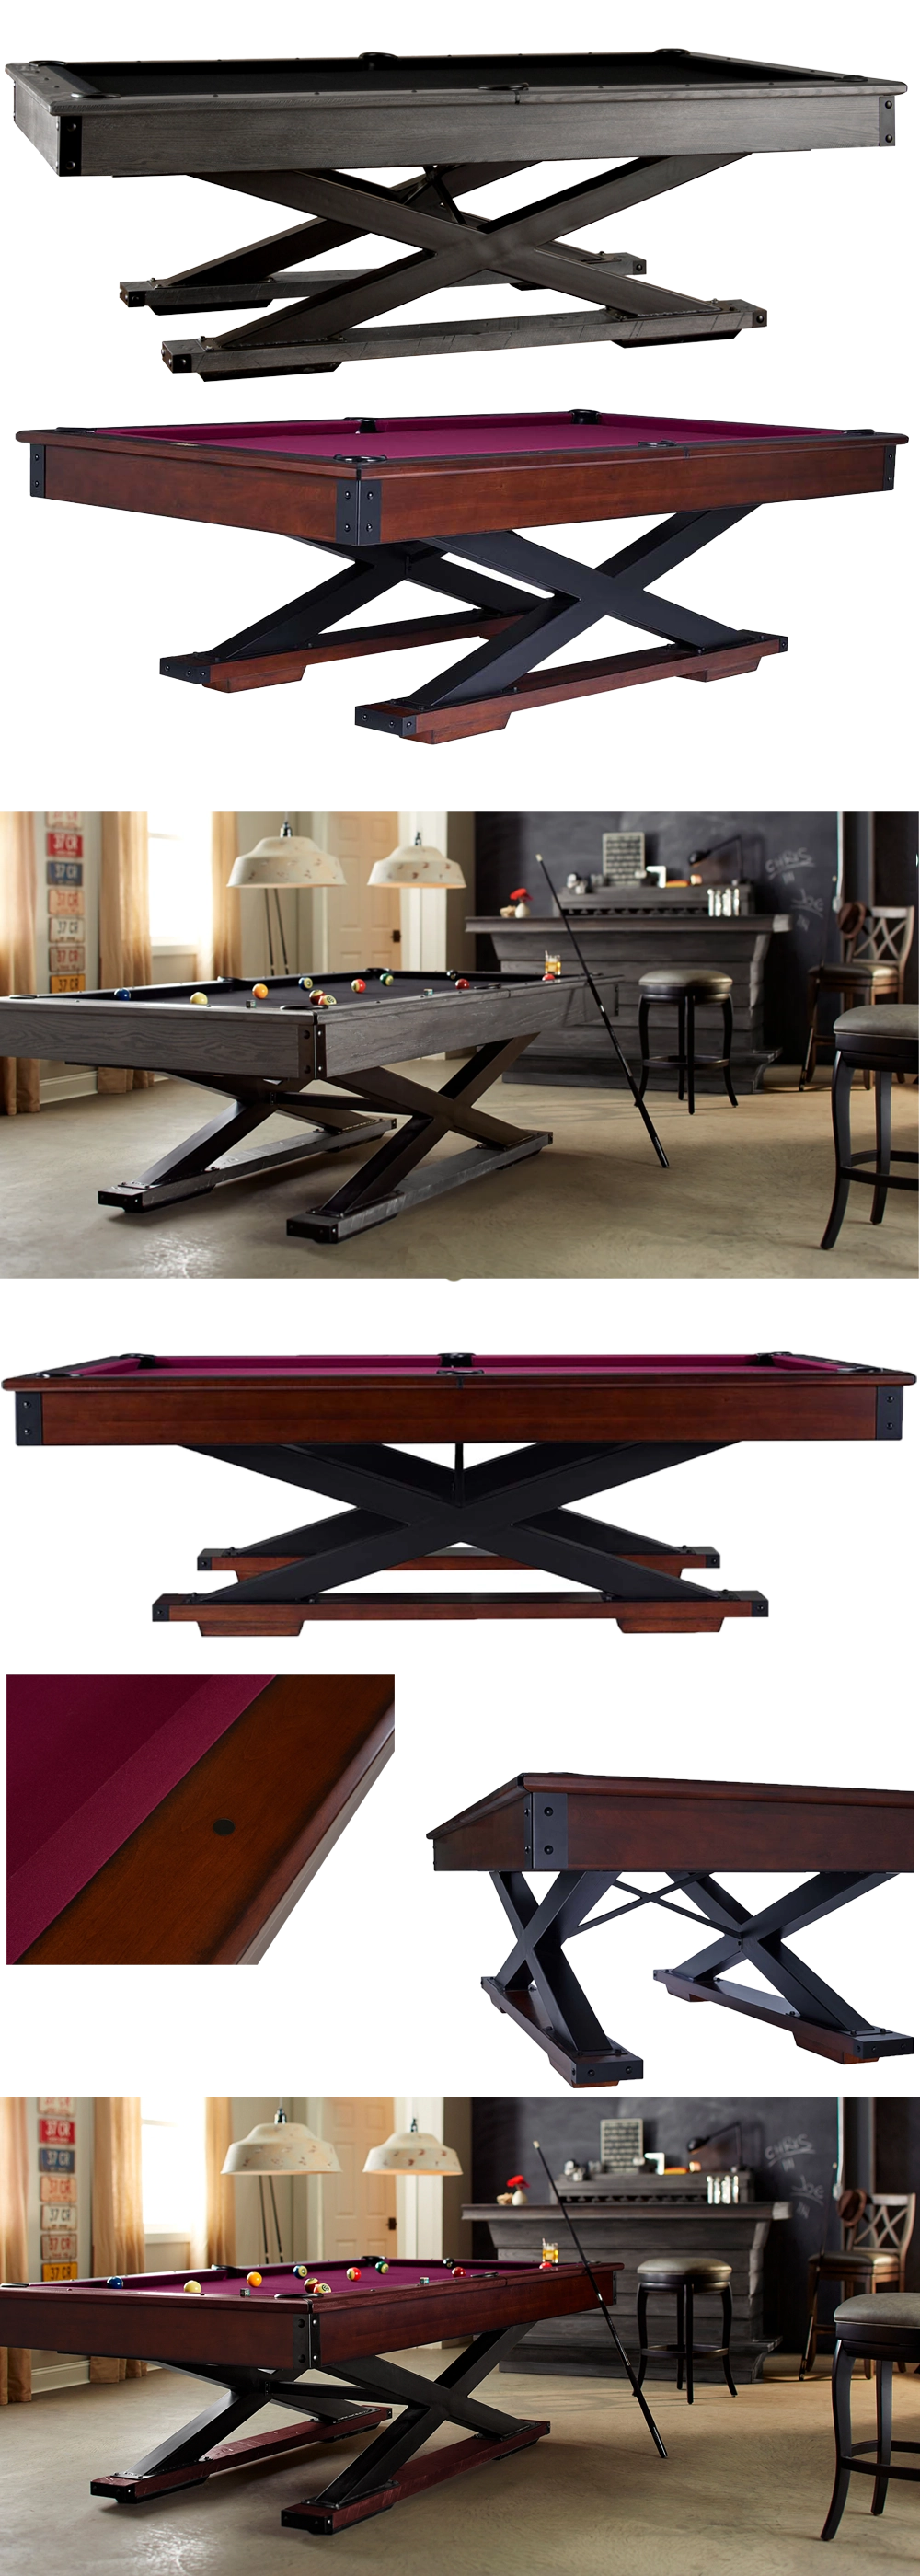 Quest Pool Table Images